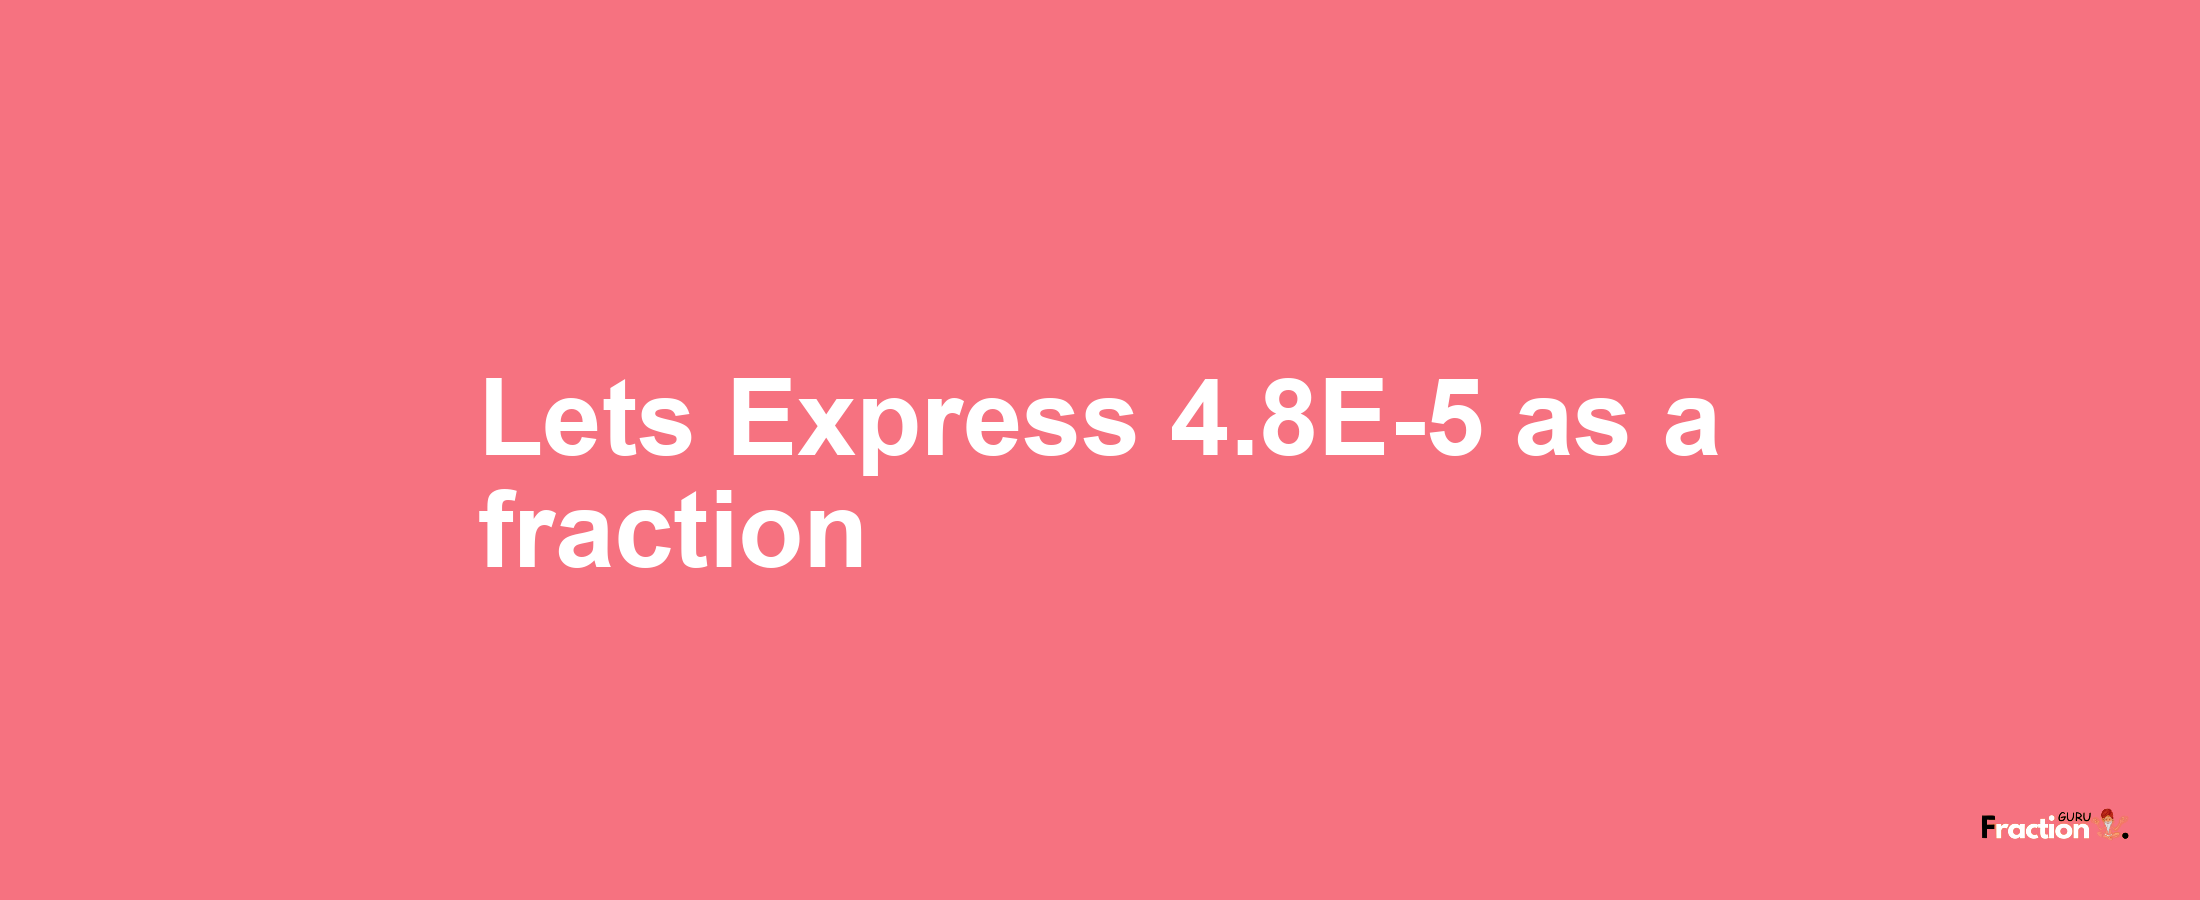 Lets Express 4.8E-5 as afraction